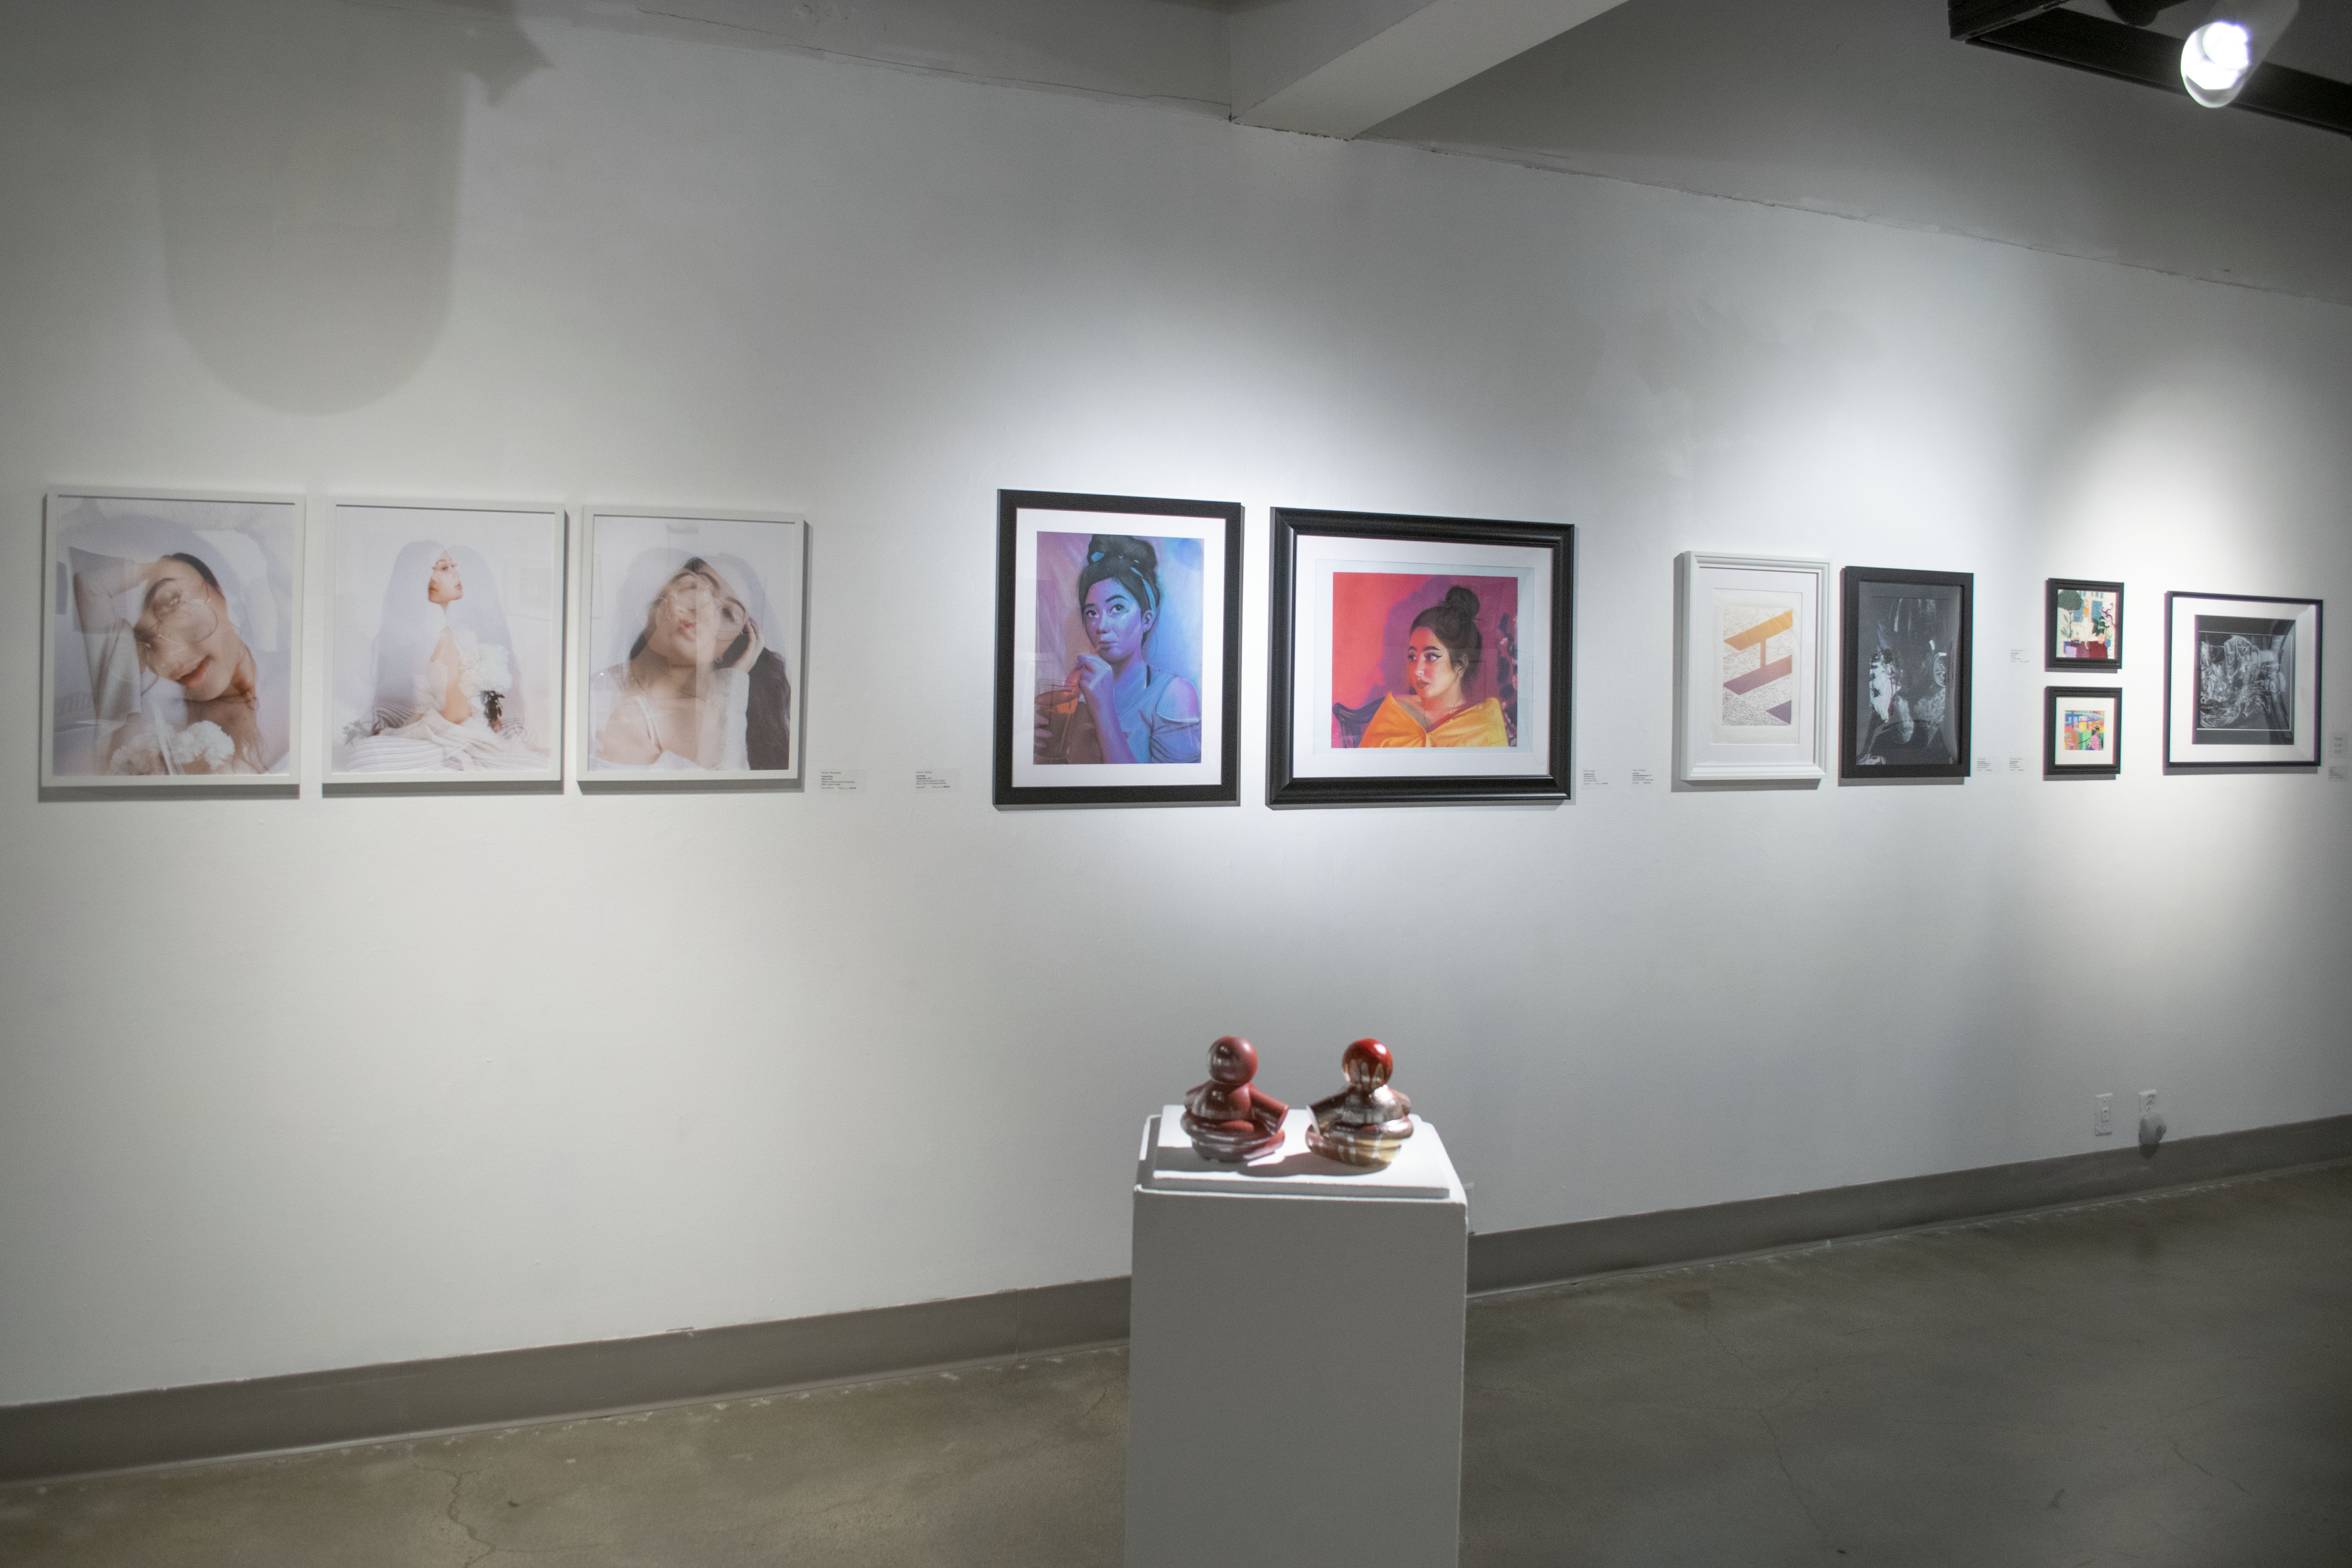 Back of gallery, Exhibition: PolyKroma 2019, Apr. 27, 2019 to May 19, 2019, Co-curated by Michele Cairella Fillmore & Sooyun Im, W. Keith & Janet Kellogg Art Gallery, Cal Poly Pomona.